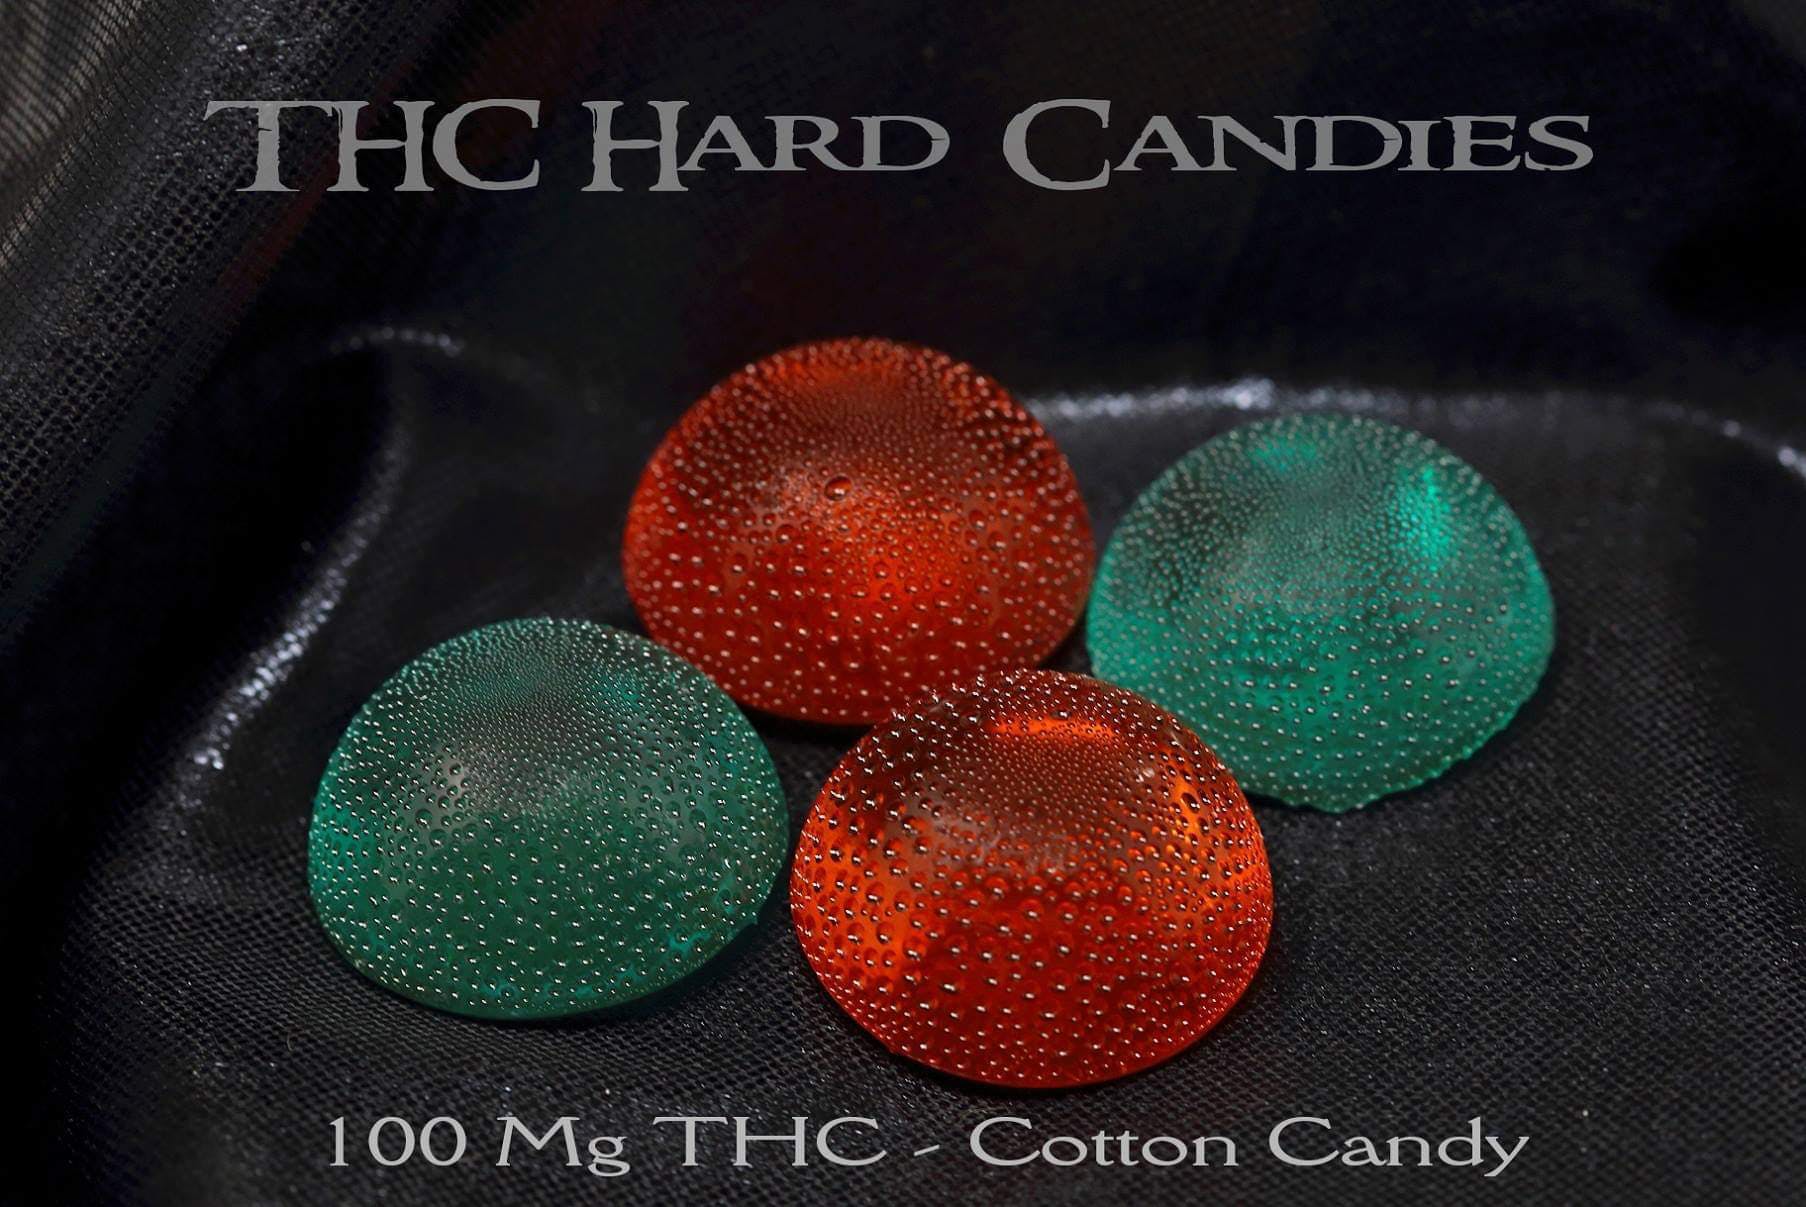 edible-4-pack-hard-candy-2c-thc-100-mg-per-package